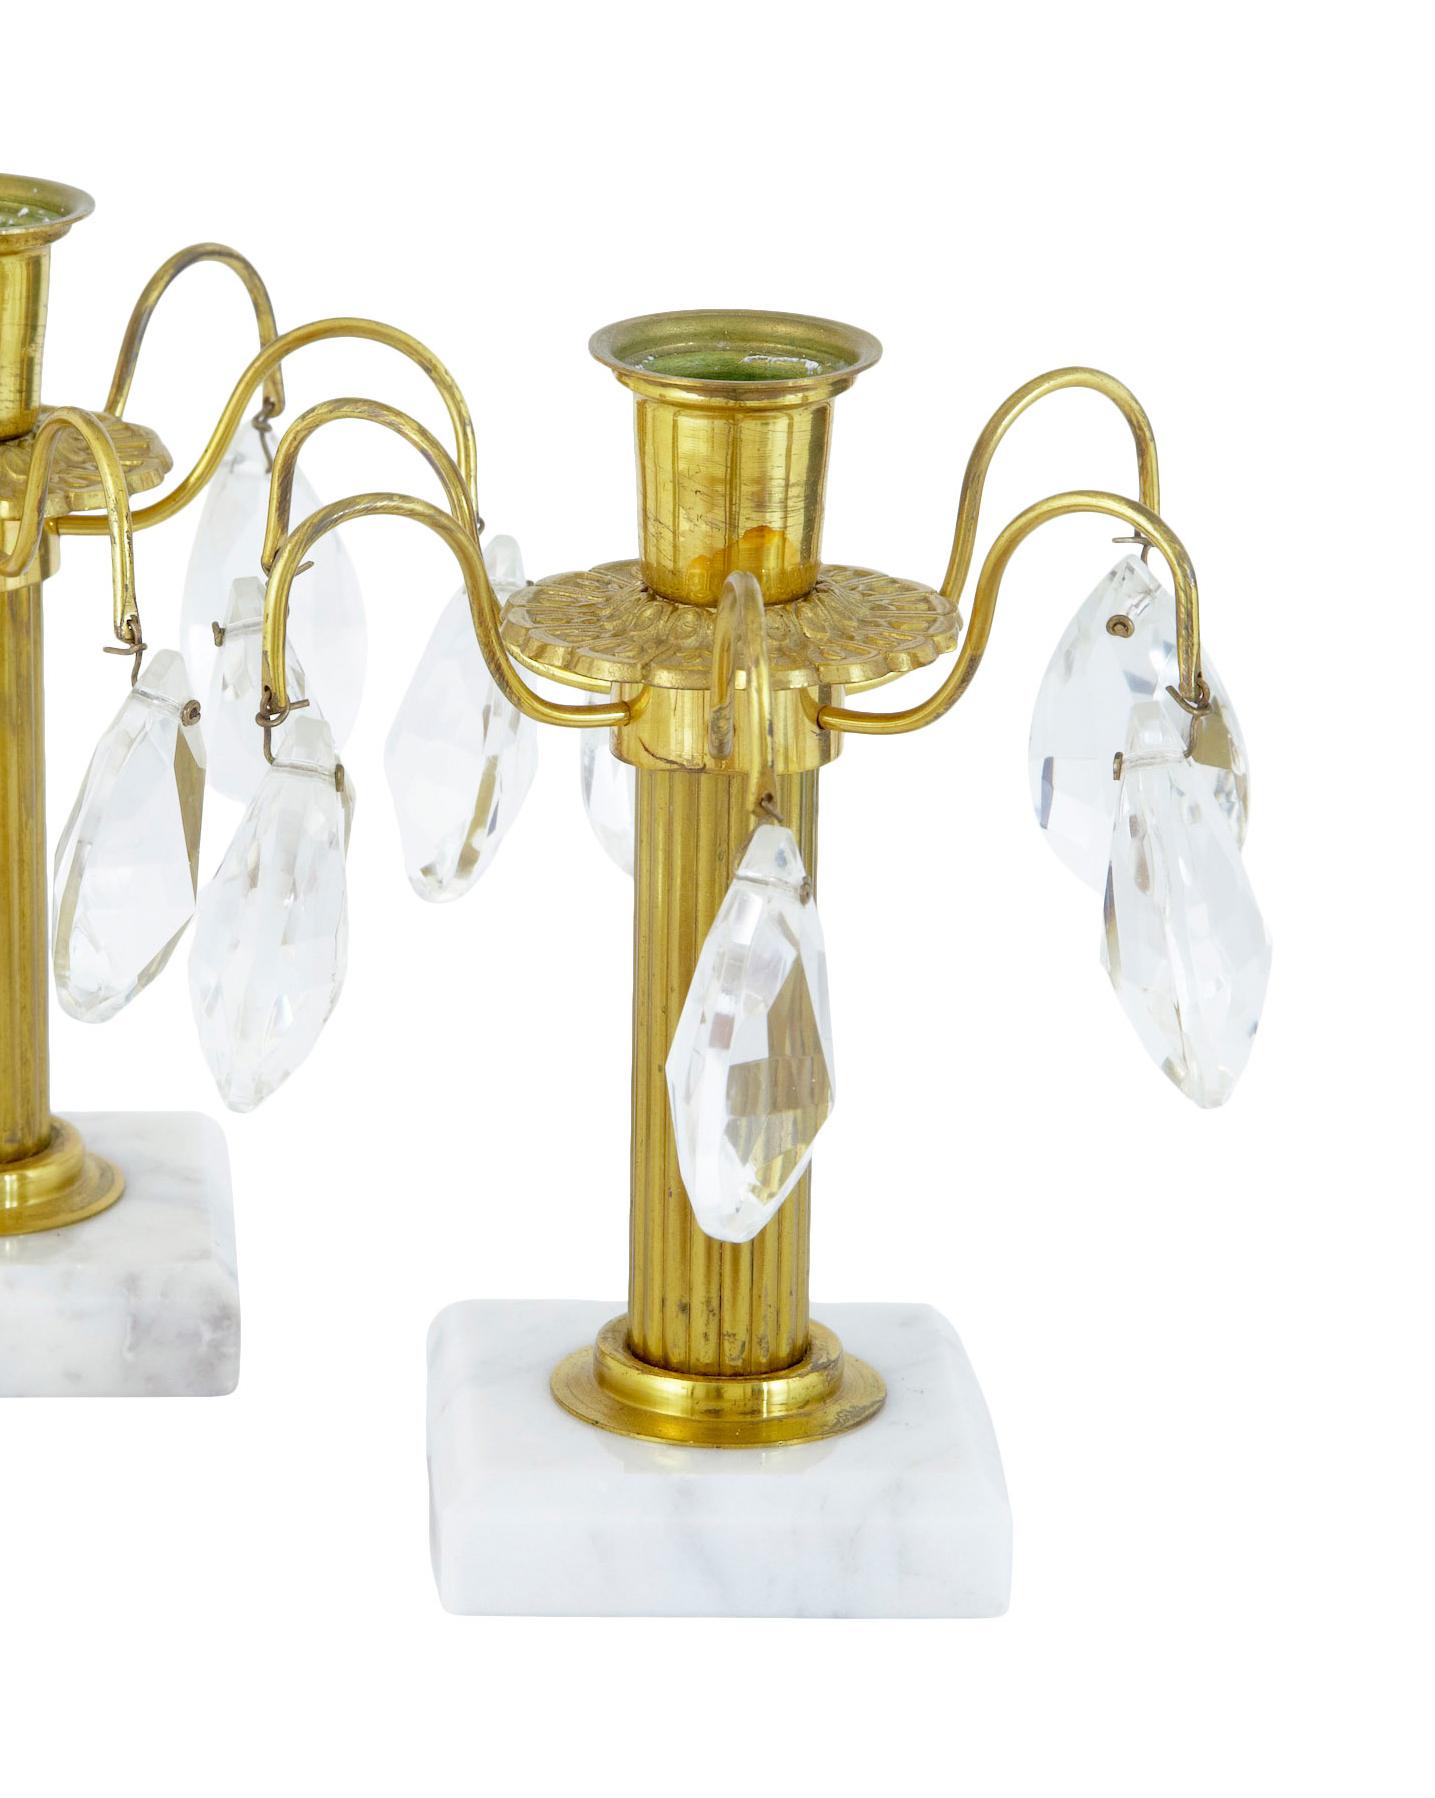 Small pair of 1950’s ornate cut glass candlesticks

Lovely pair of small cut glass droplet candlesticks. Single candle holders.

Ideal decoration for the dining table, mantlepiece or period desk.